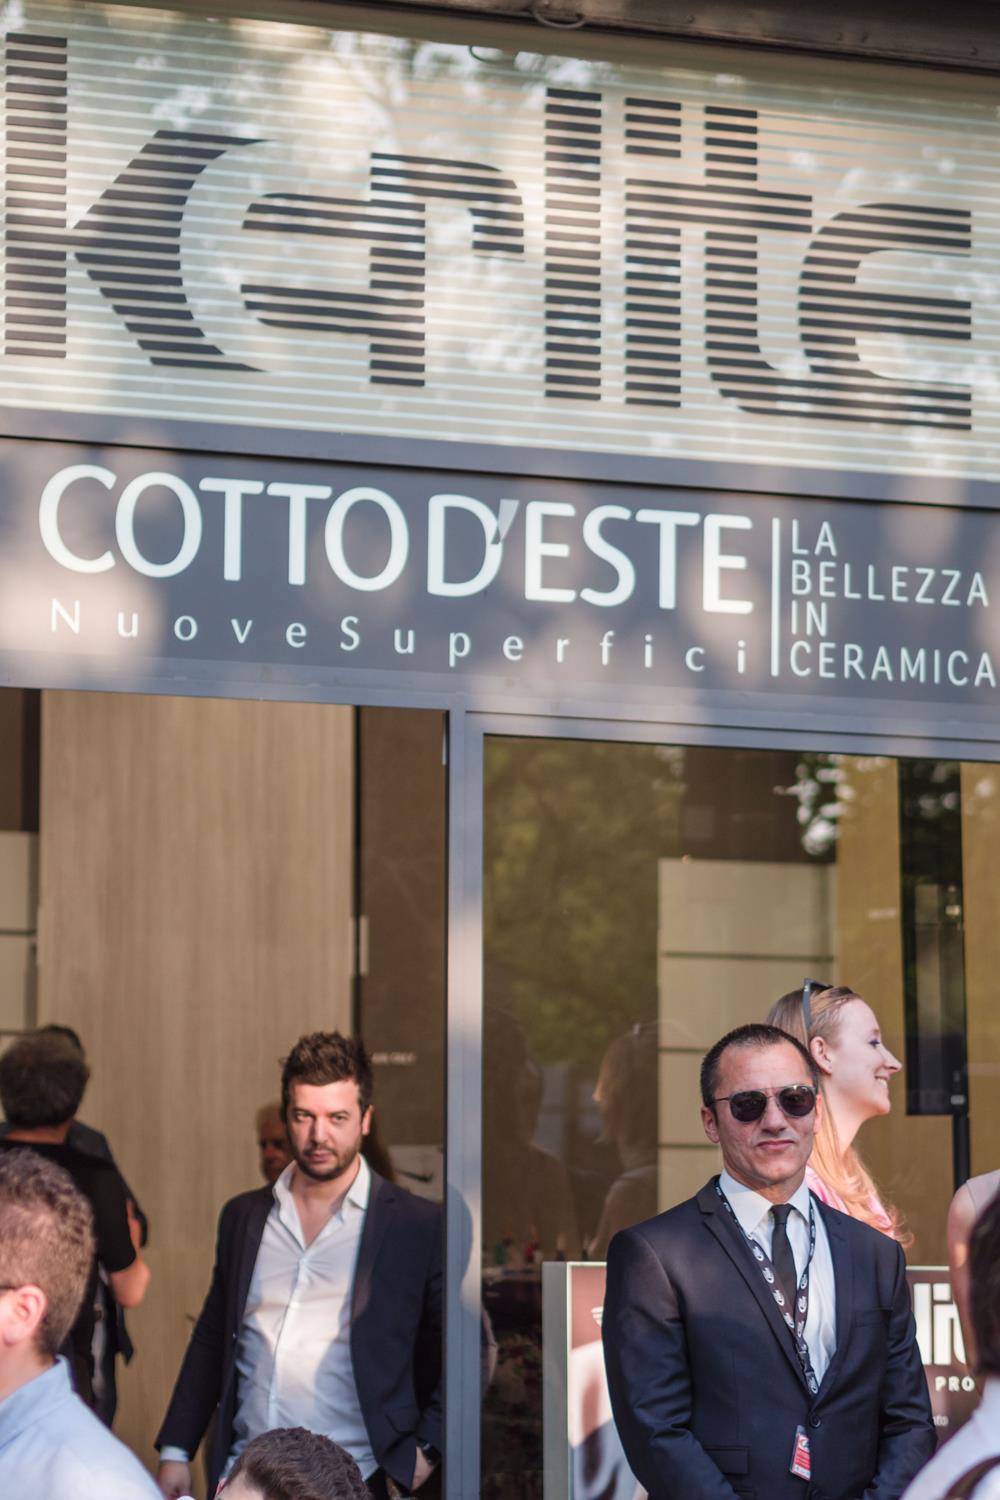 Cotto d’Este at the Fuorisalone - Night out: Photo 33